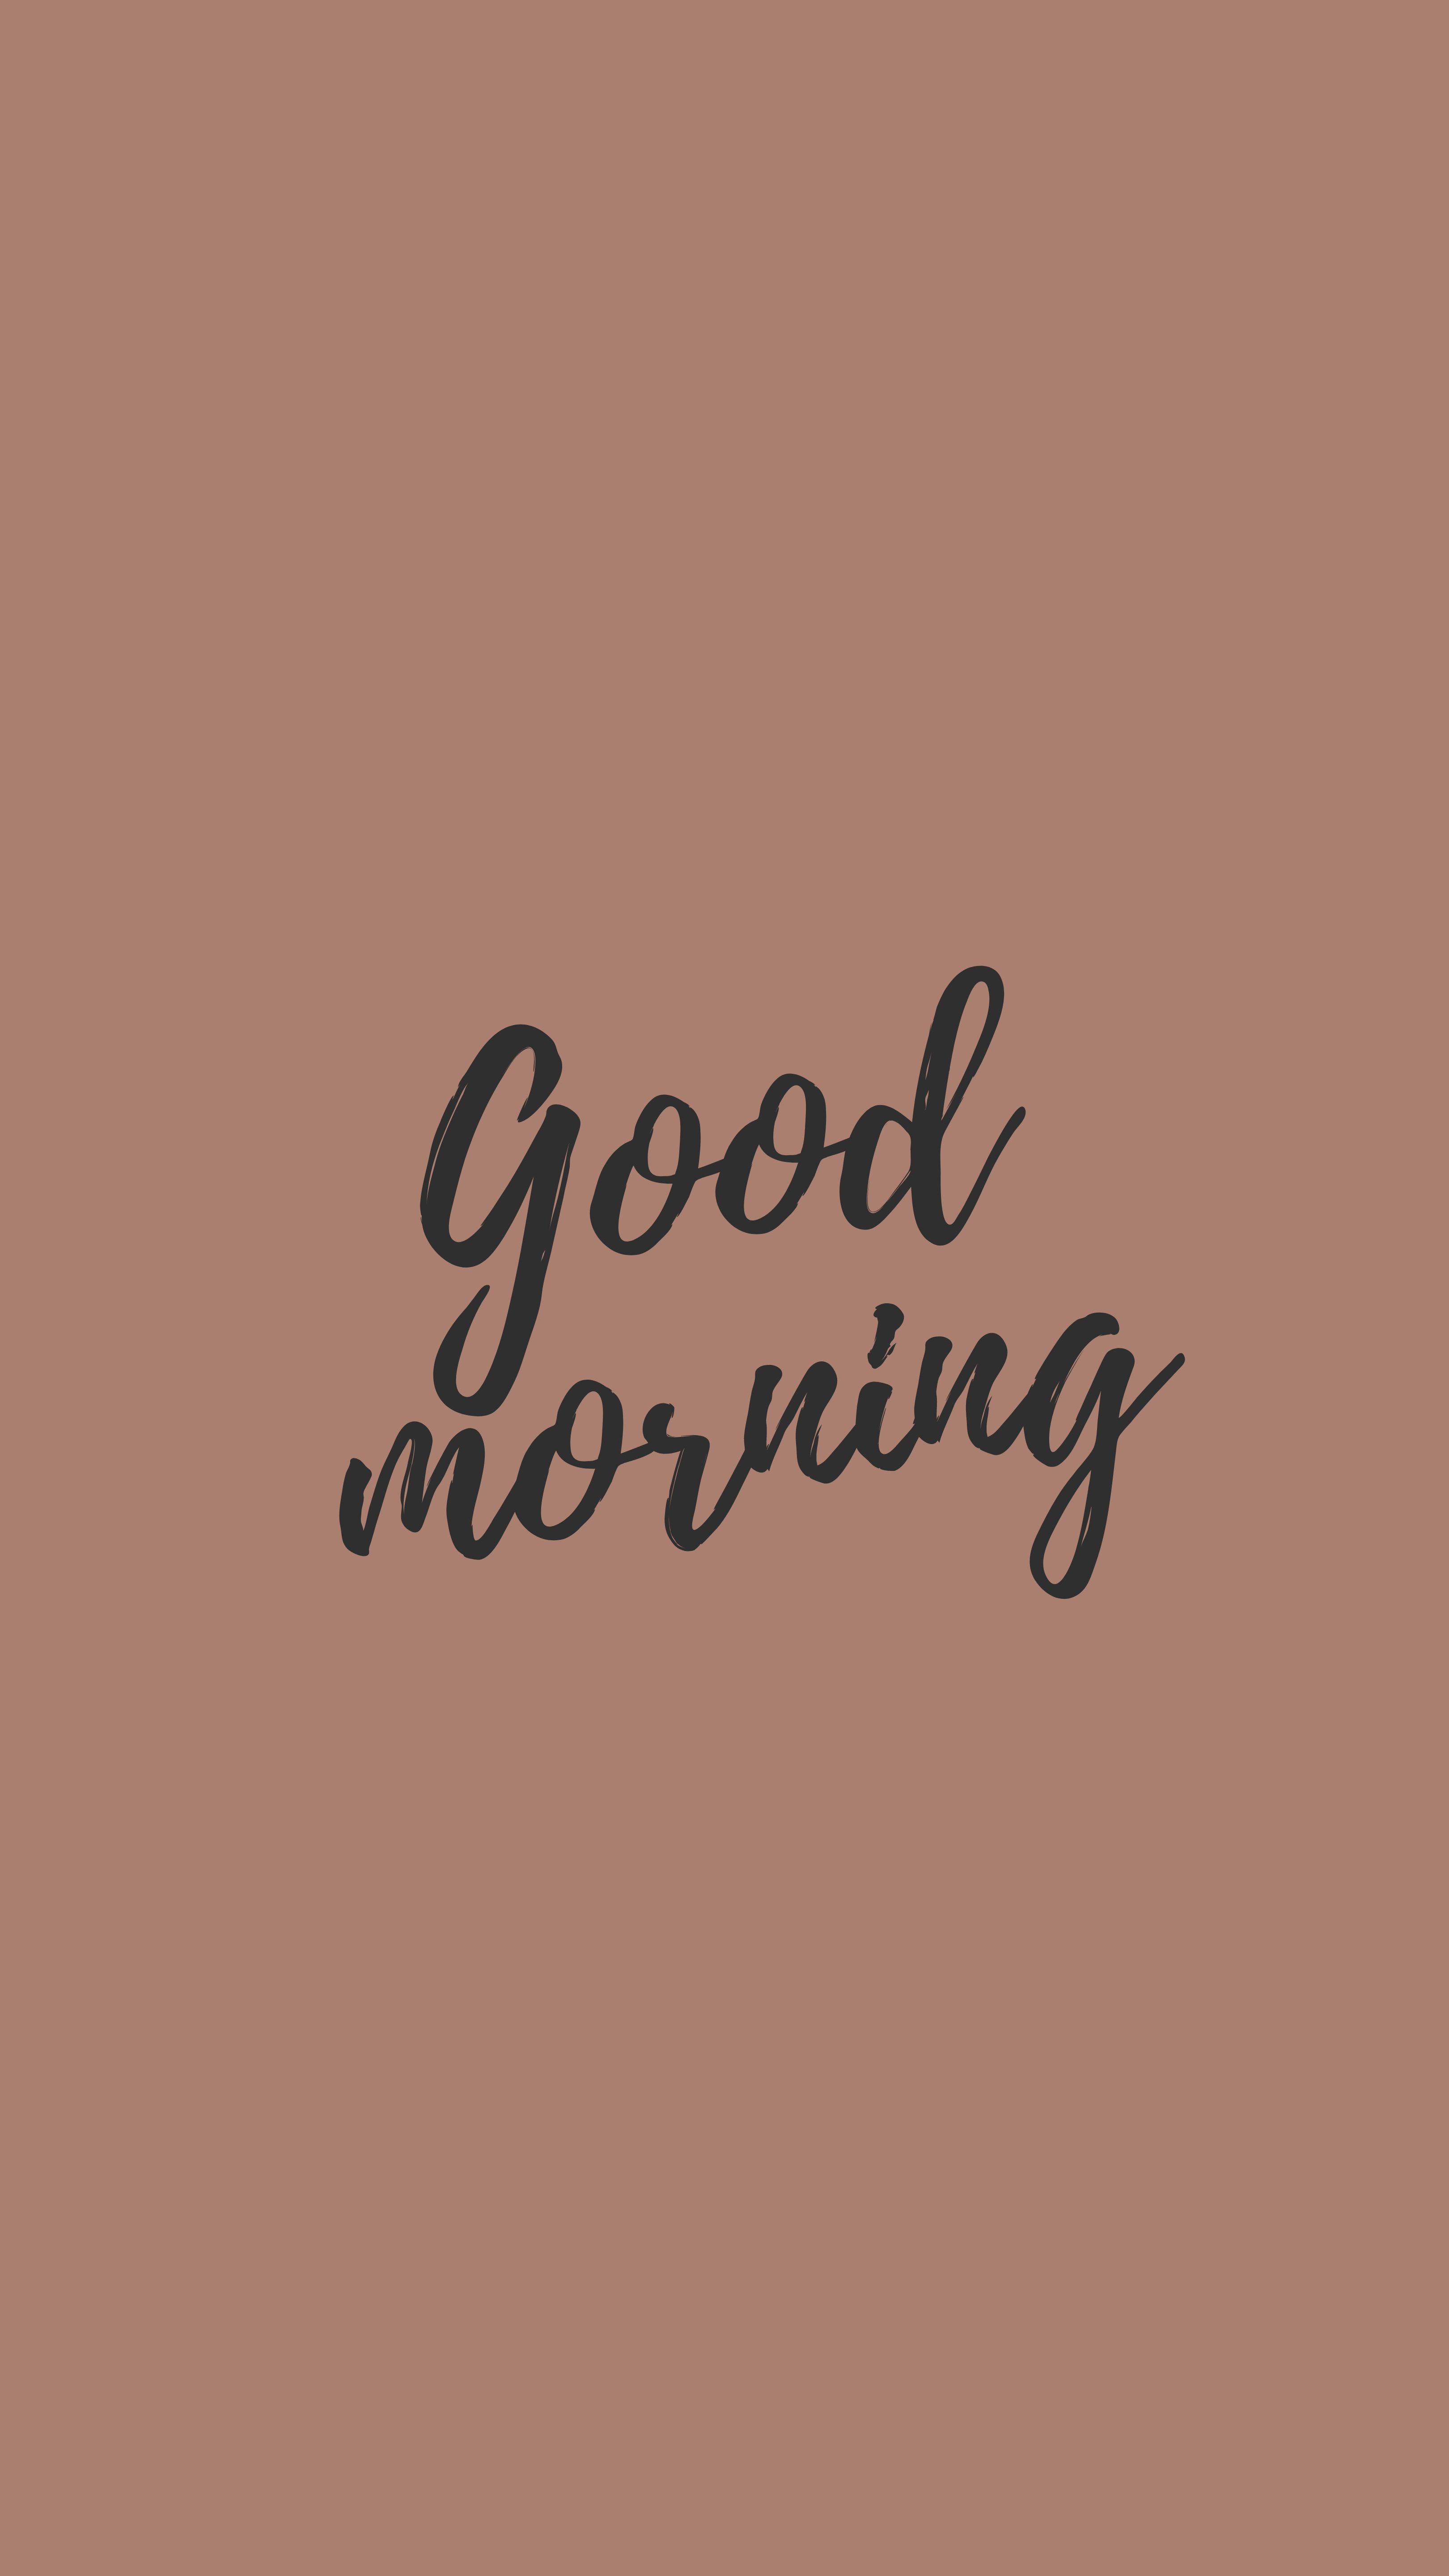 text, words, morning, inscription, lettering, good download HD wallpaper